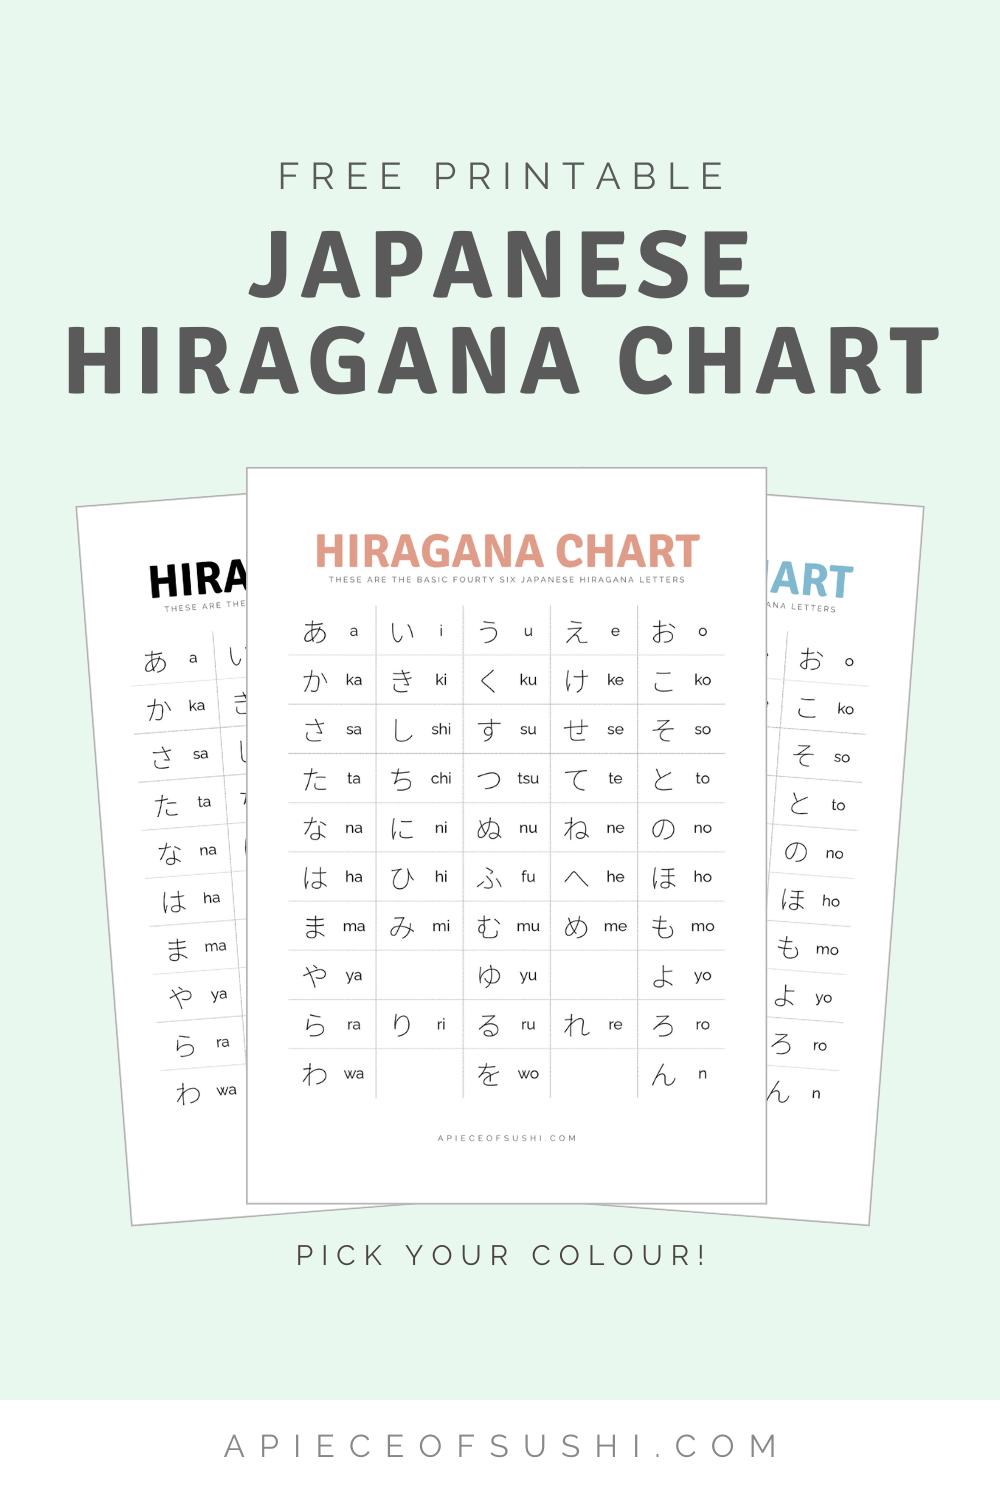 hiragana chart free download printable pdf with 3 different colours a piece of sushi